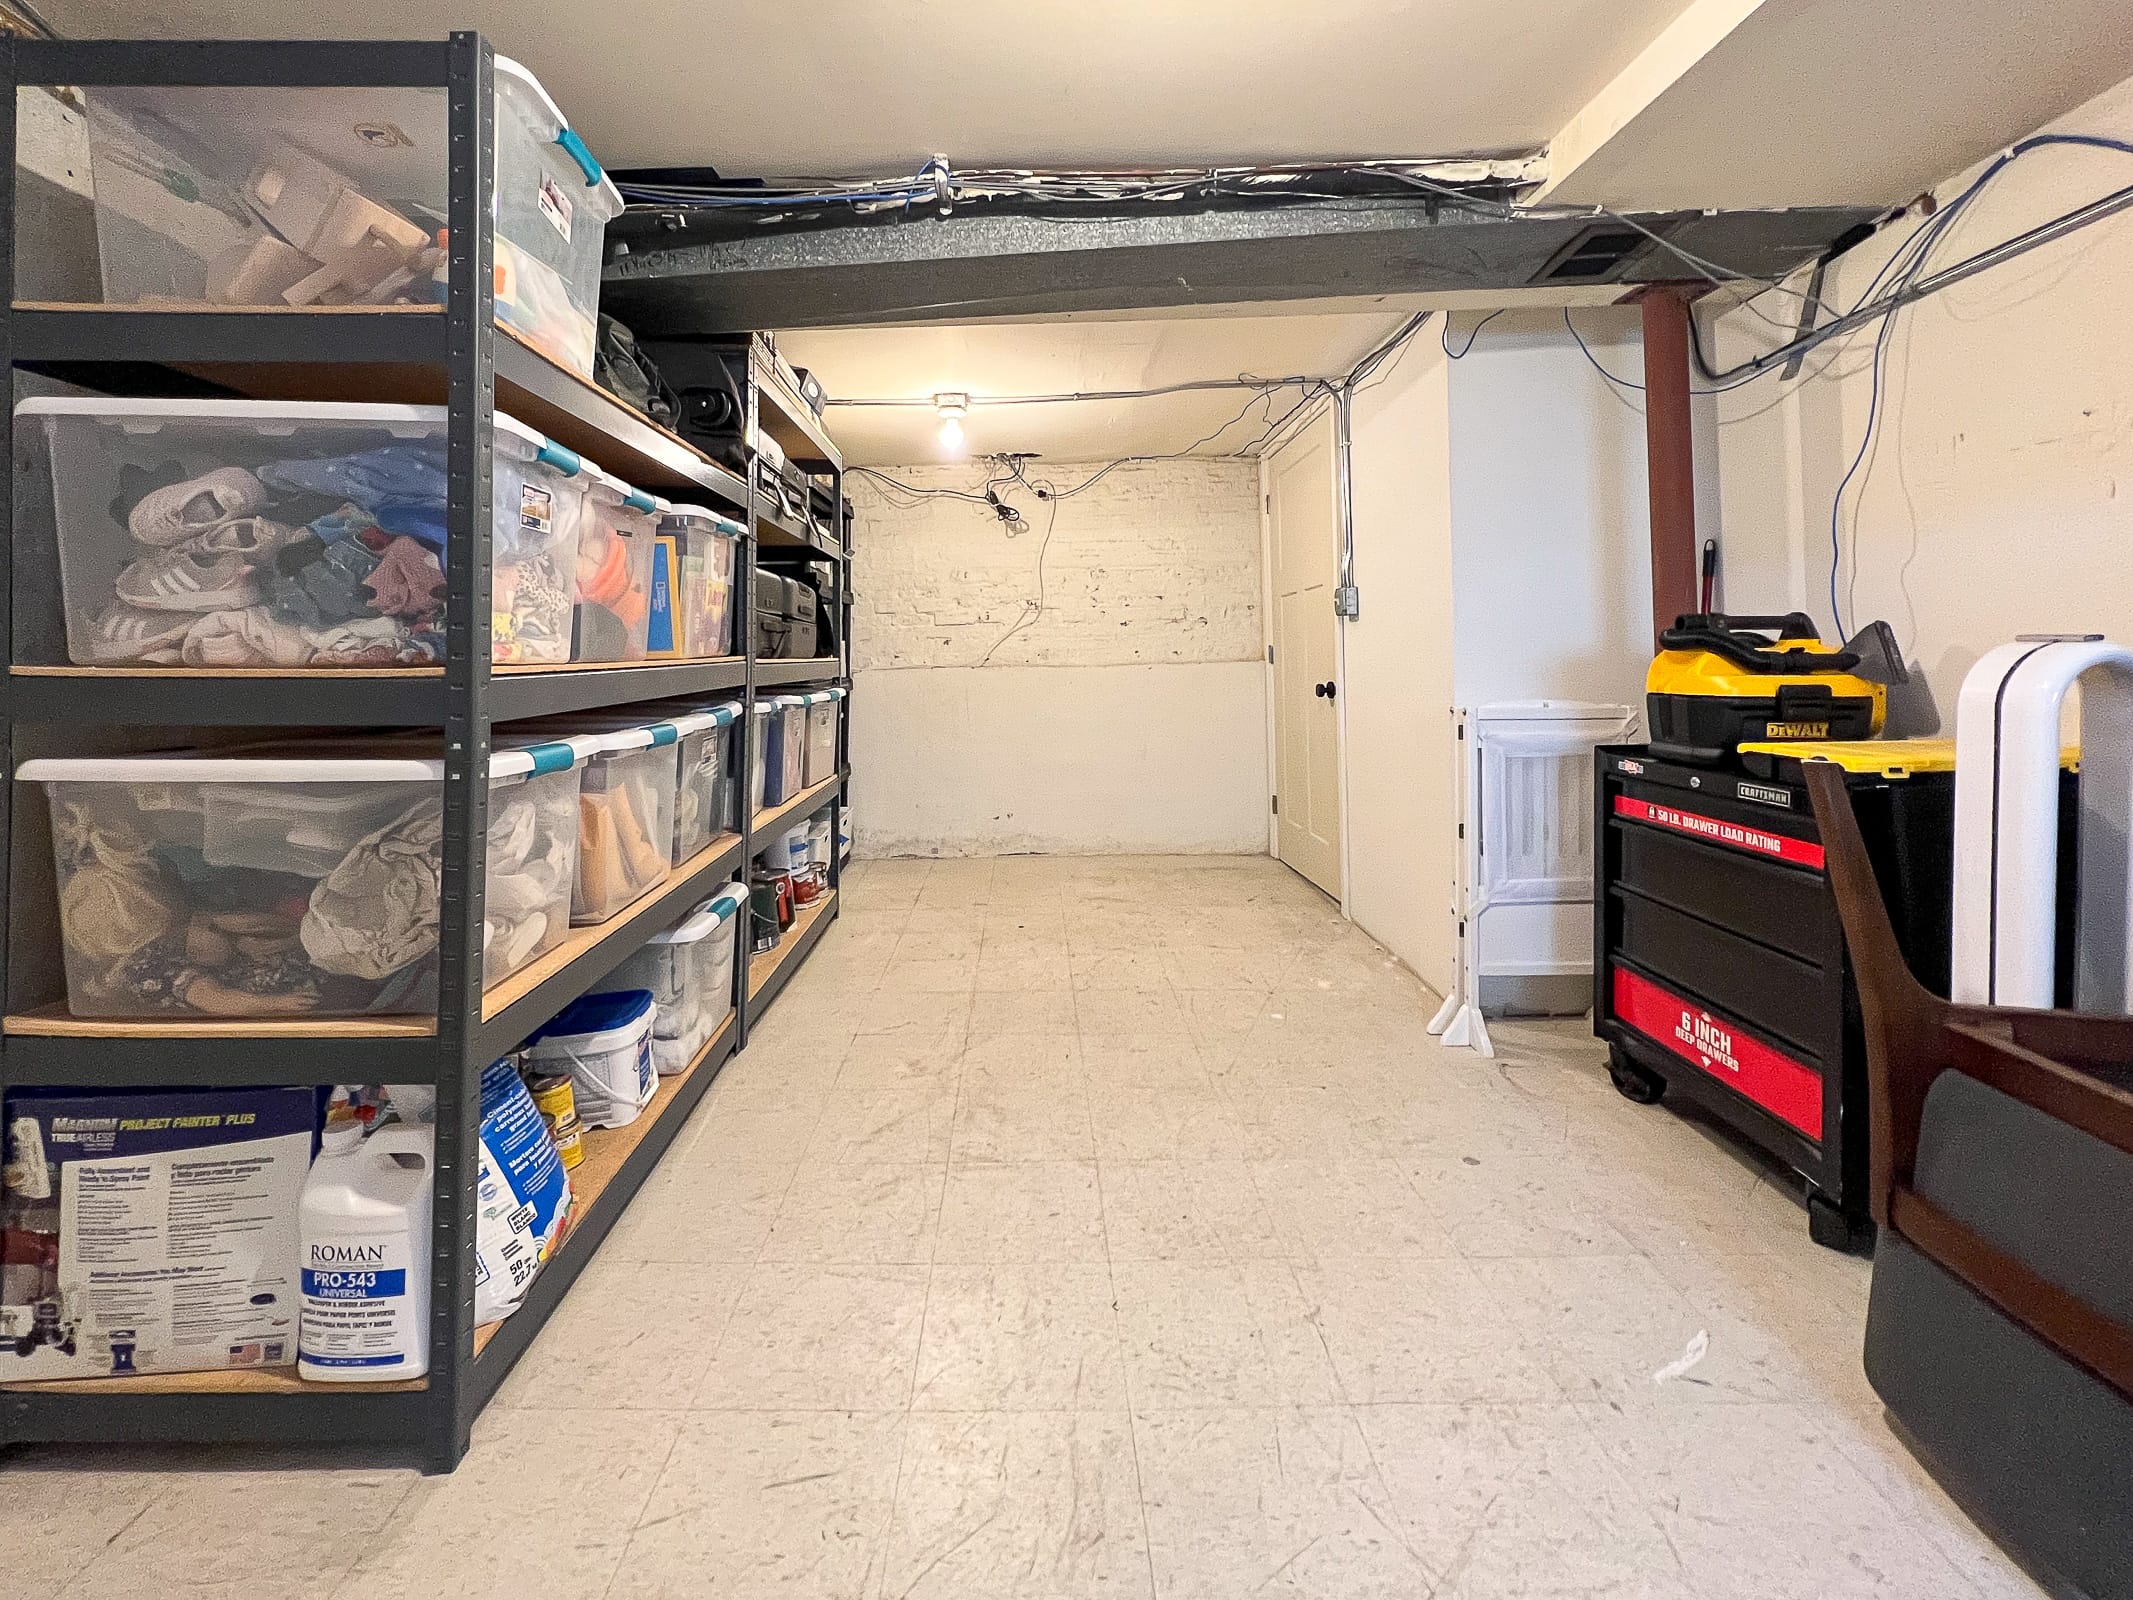 Our organized storage room